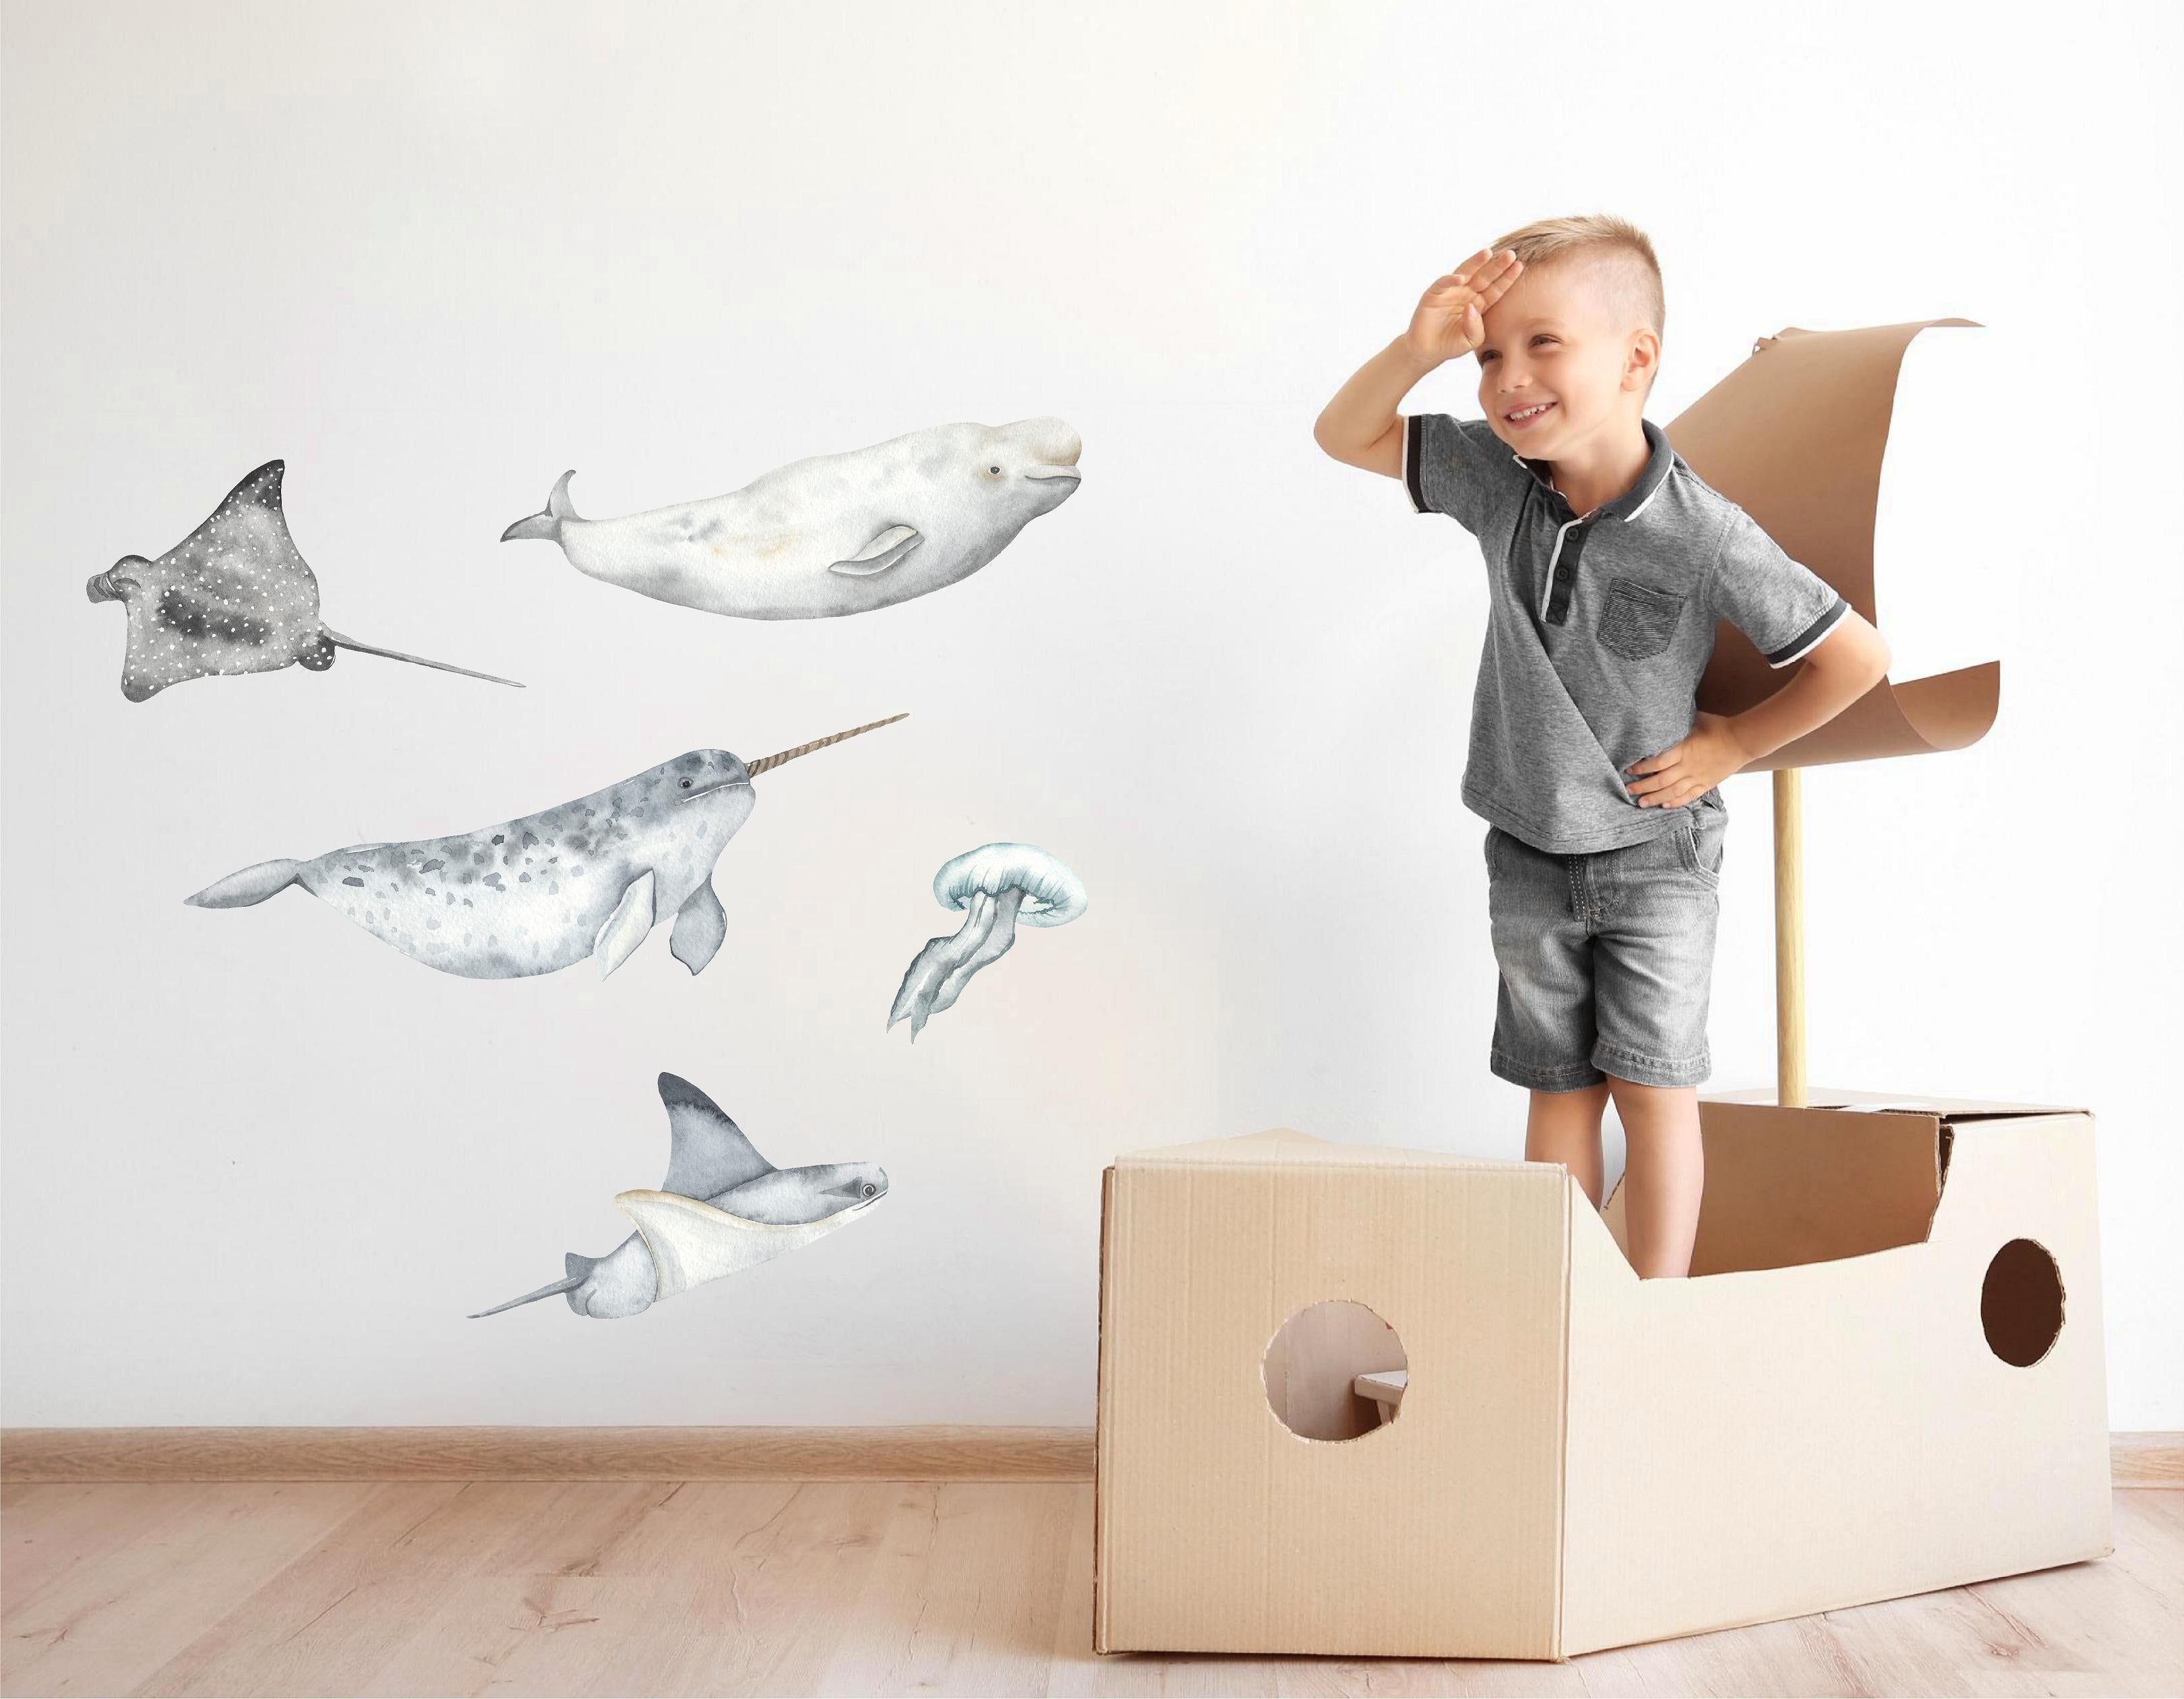 Gray Marine Life Set #3 Wall Decal Ocean Sea Life Removable Fabric Wall Sticker | DecalBaby